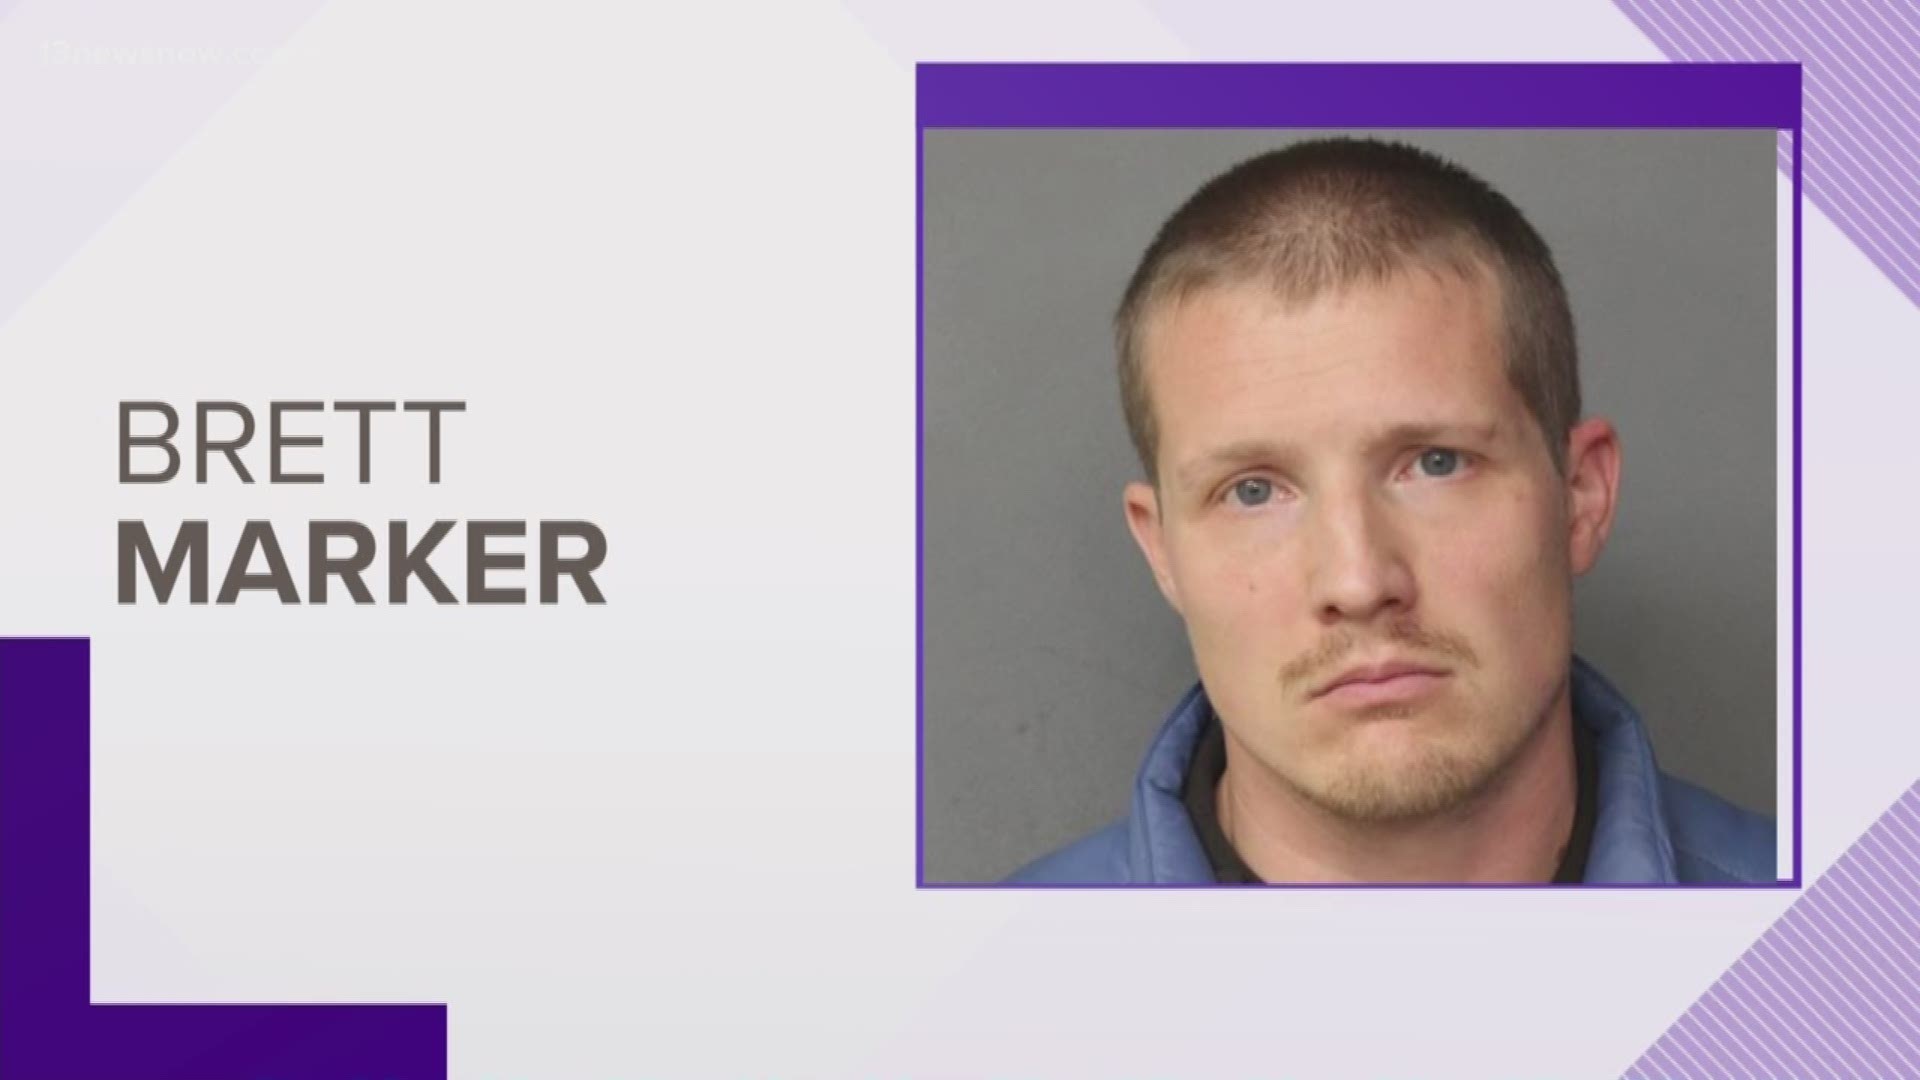 Brett Marker was a teacher at Norfolk Christian School. He faces multiple child porn charges. Police said they arrested him after they got a tip.